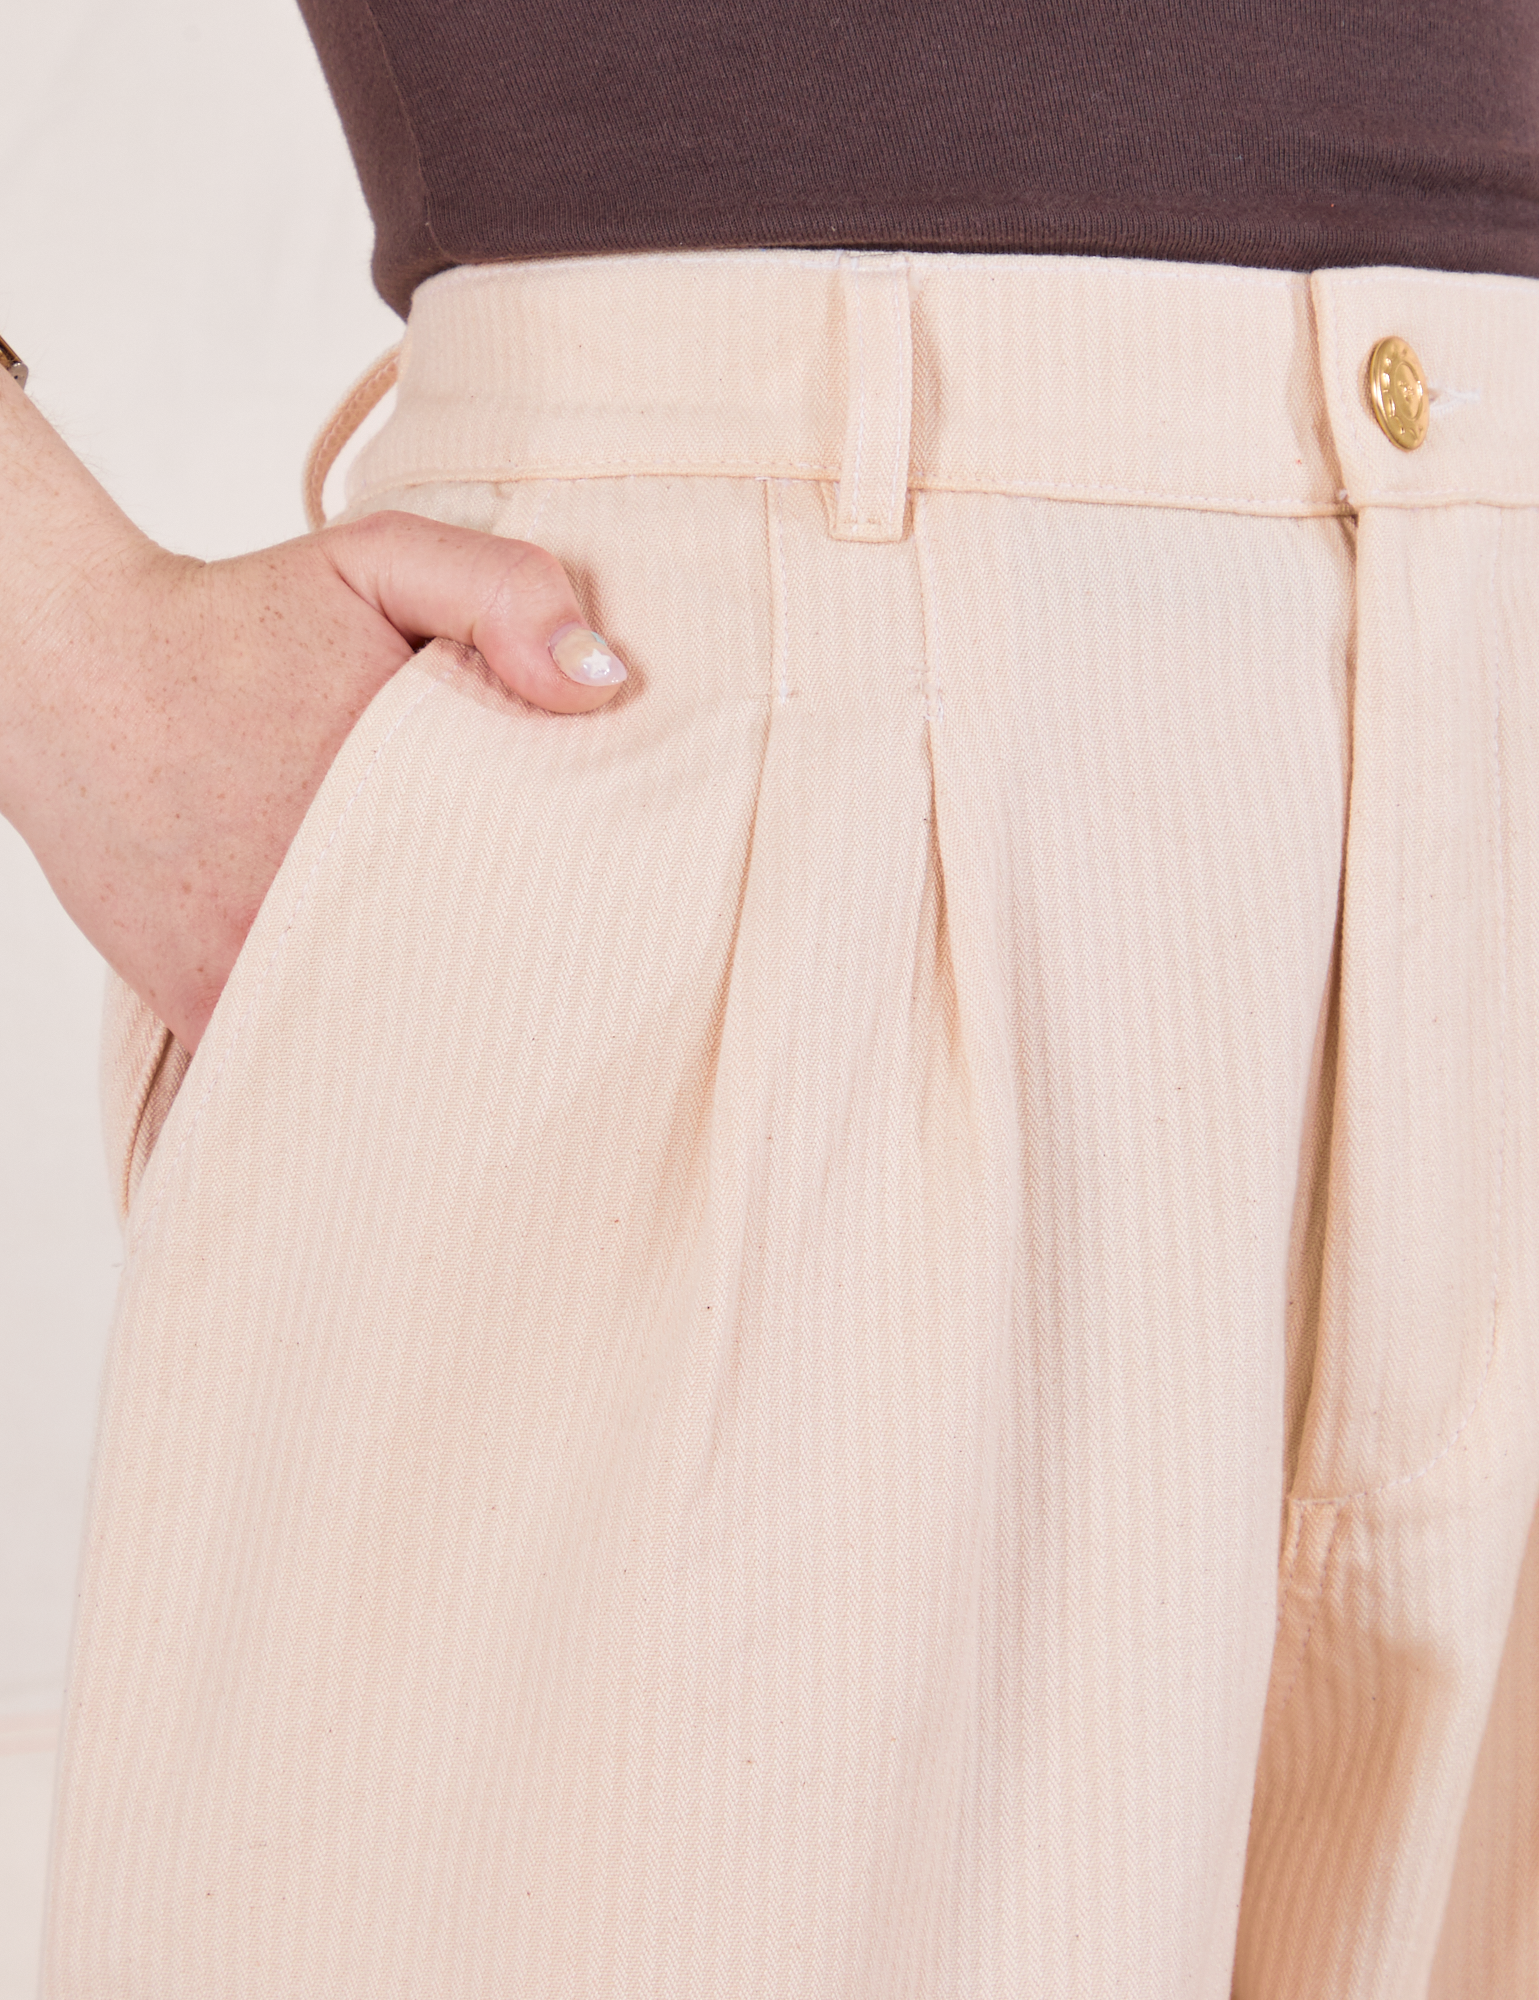 Heritage Trousers in Vintage Off-White front close up. Hana has her hand in the pocket.